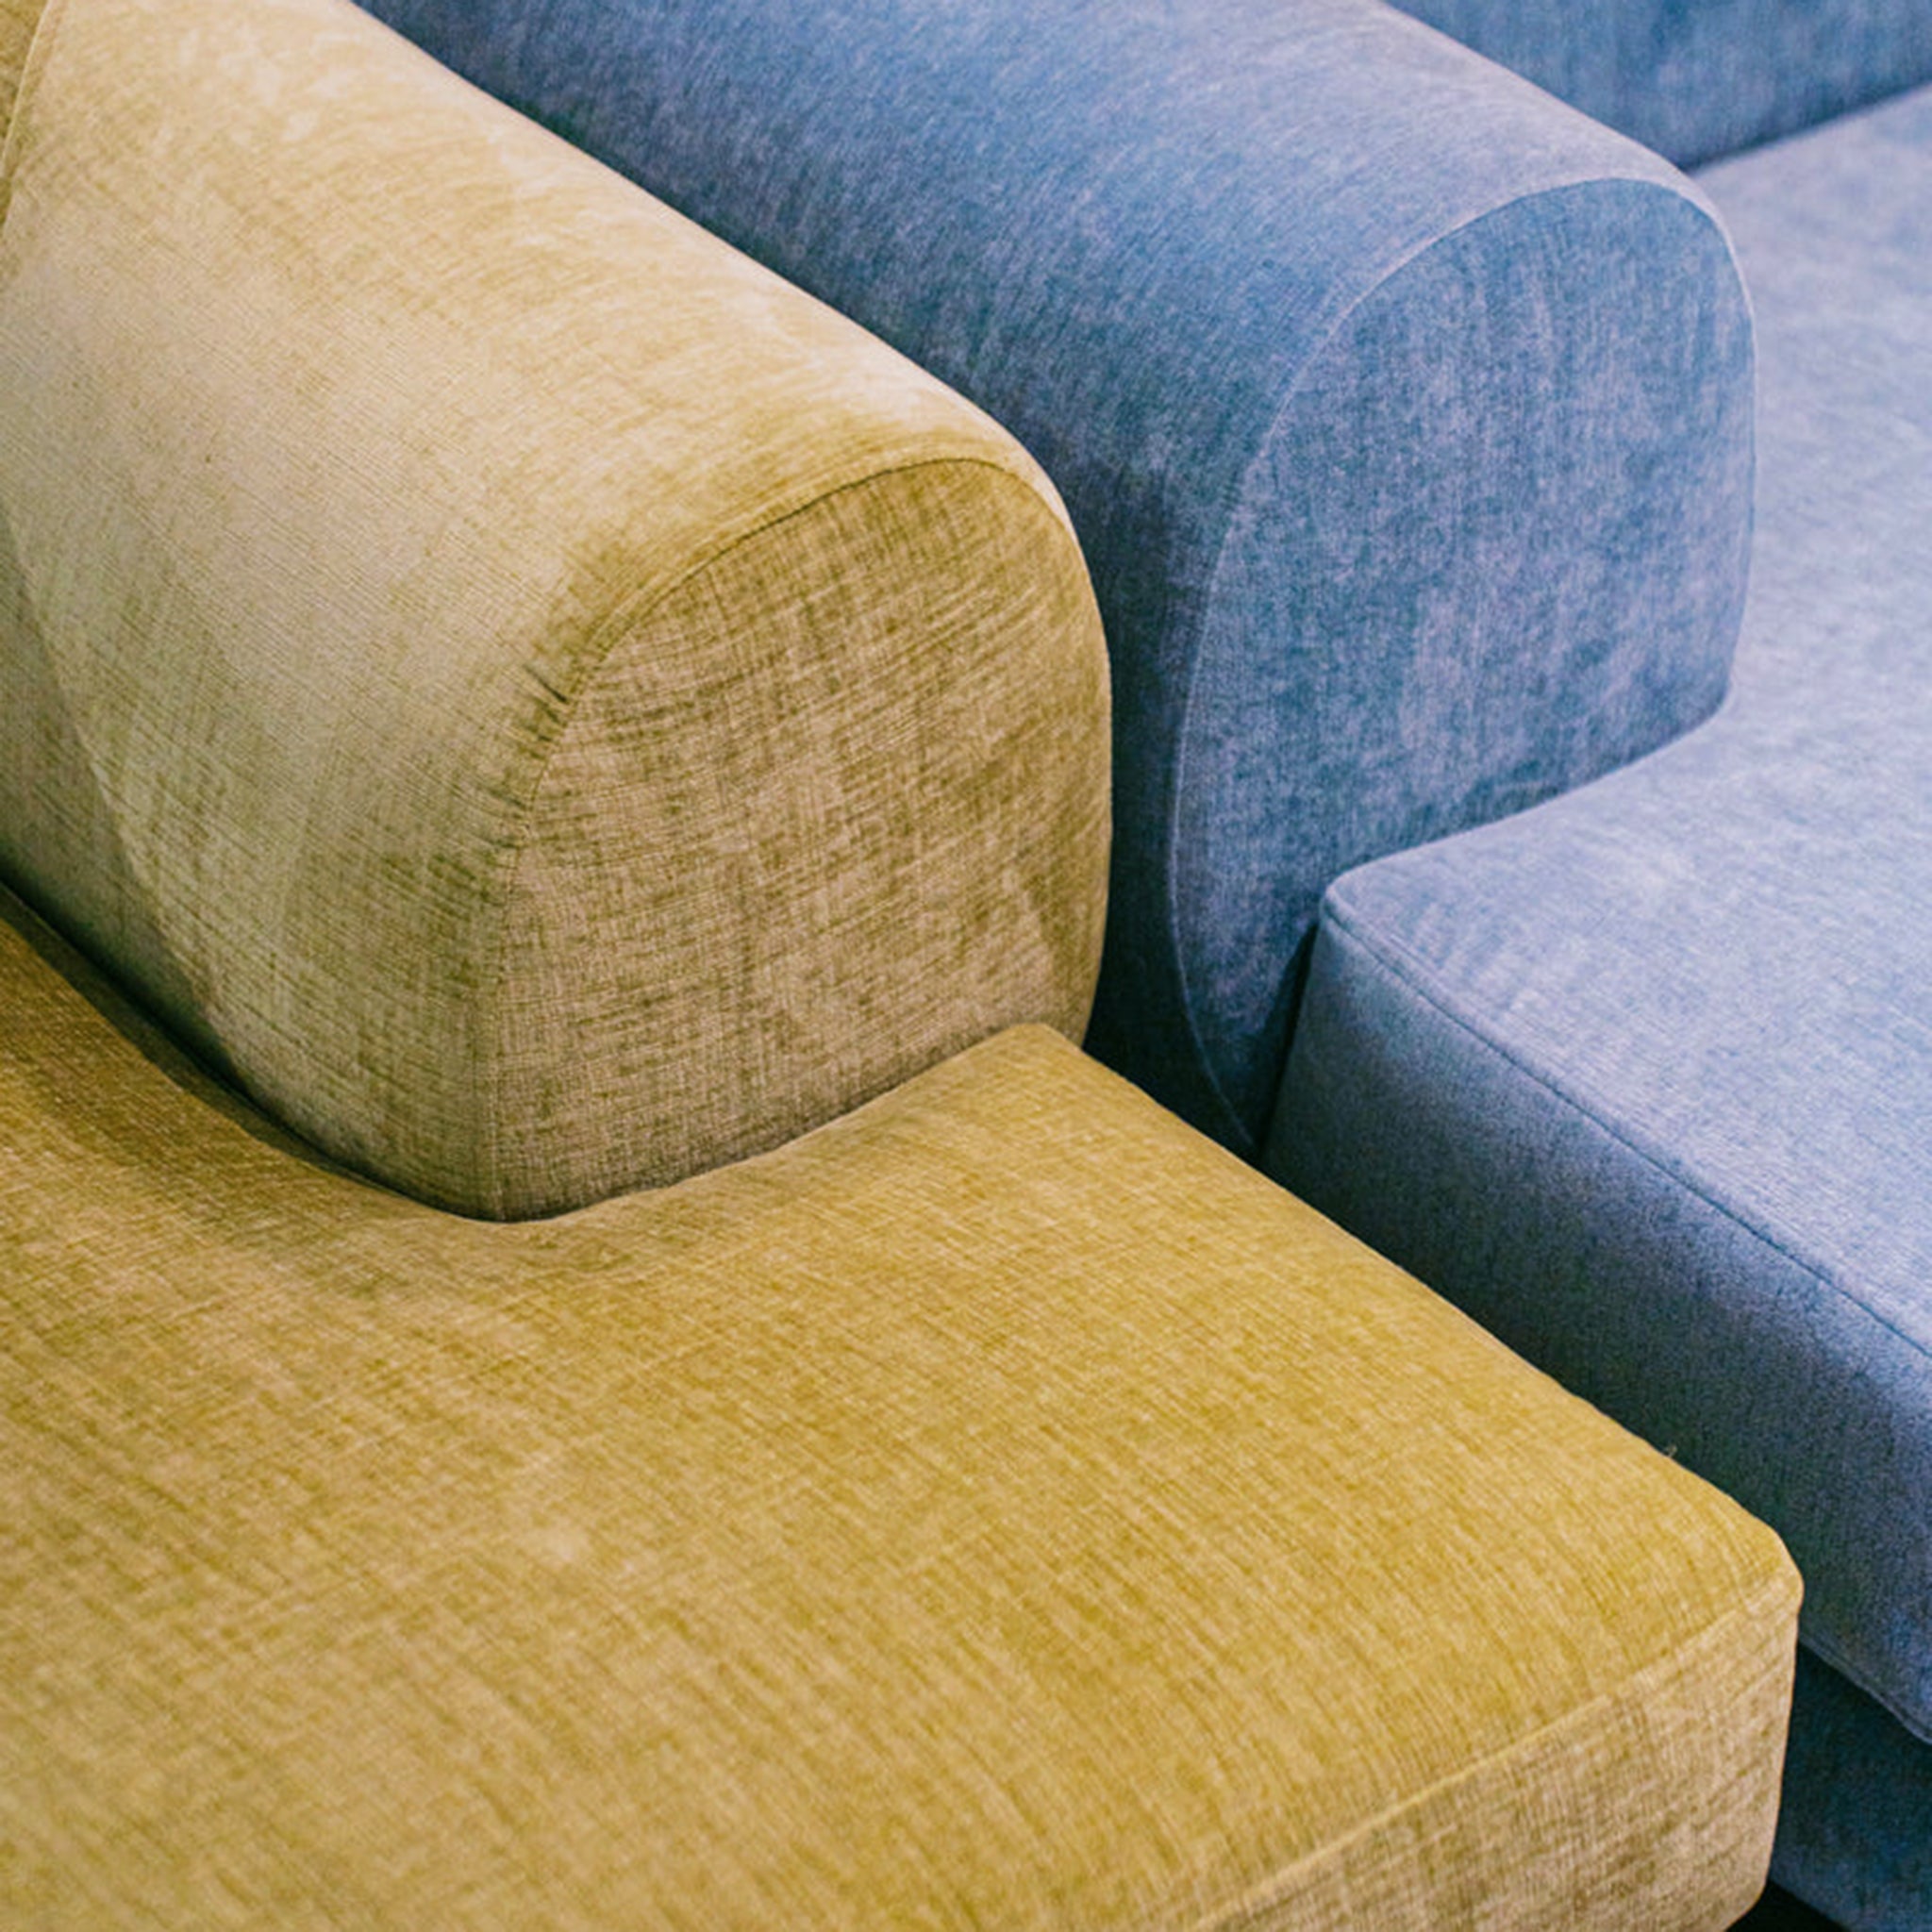 "Close-up view of The Lewis Low Lounger Accent Chairs in green and blue upholstery, highlighting their soft fabric texture and rounded armrest design."